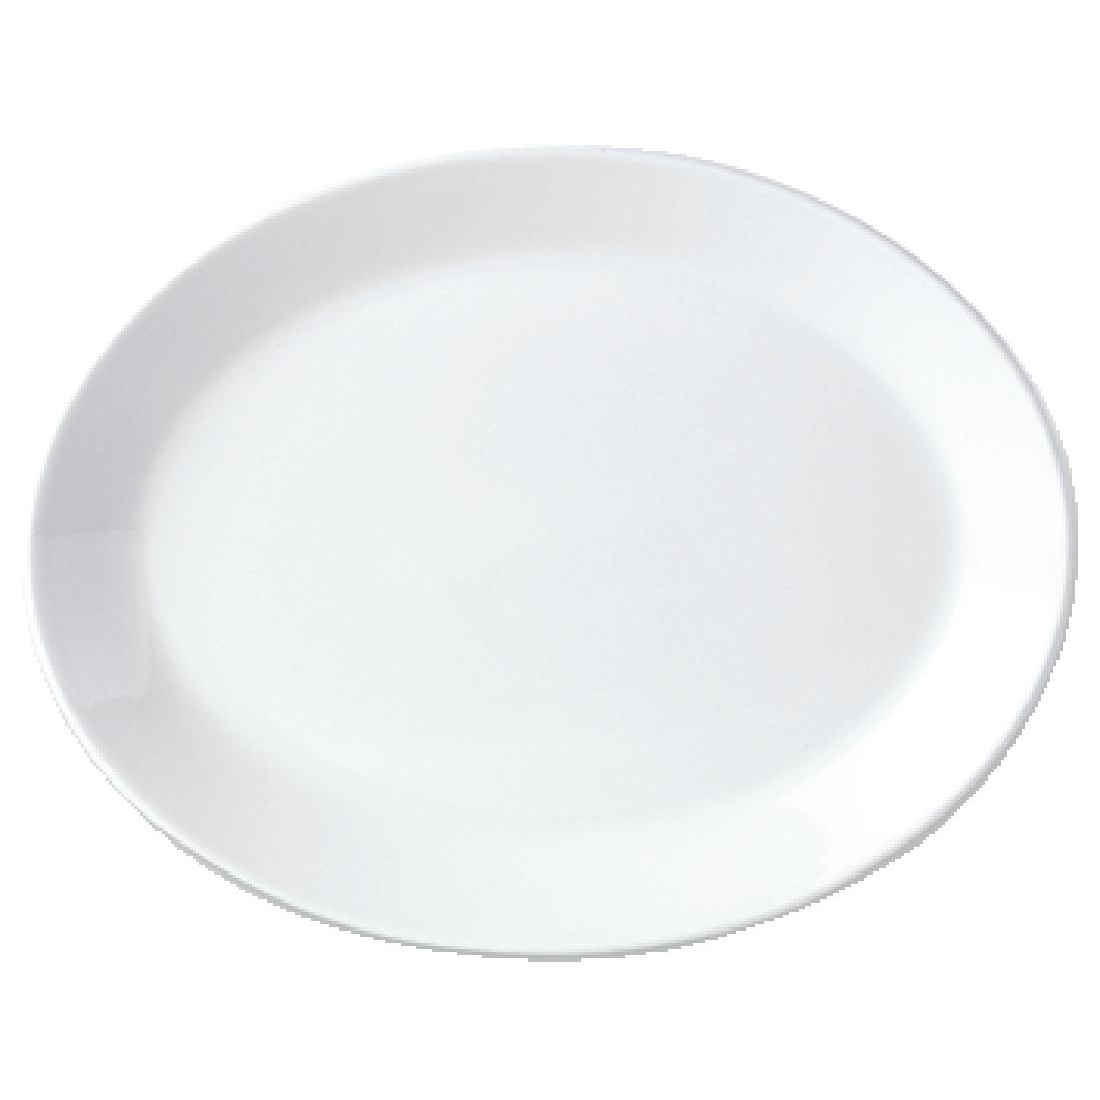 Steelite Simplicity White Oval Coupe Dishes 395mm